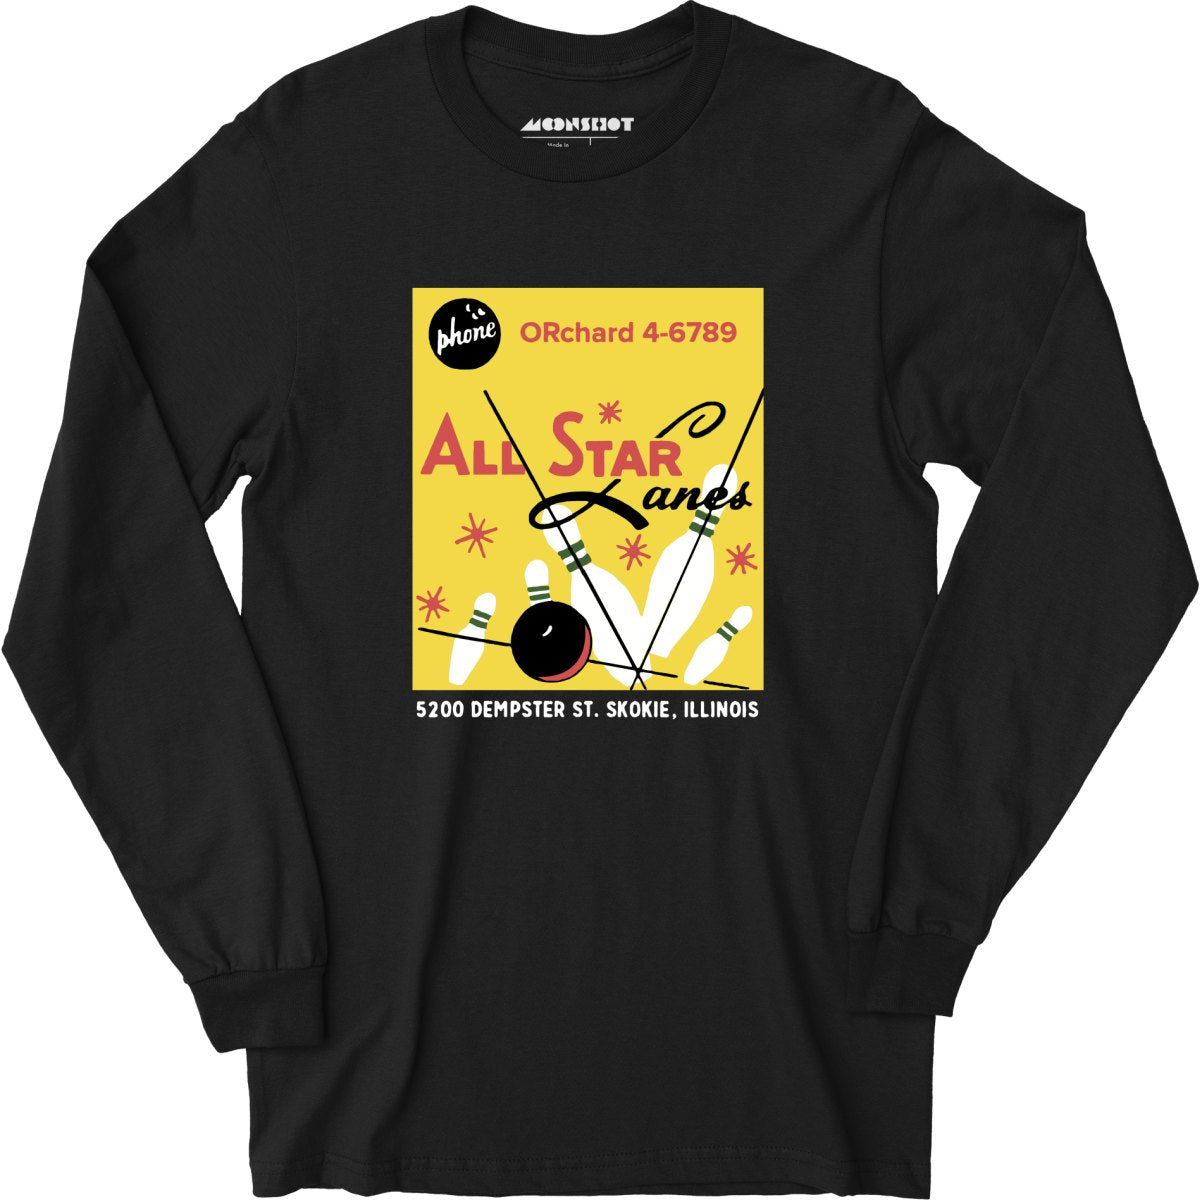 All Star Lanes v2 - St. Skokie, IL - Vintage Bowling Alley - Long Sleeve T-Shirt